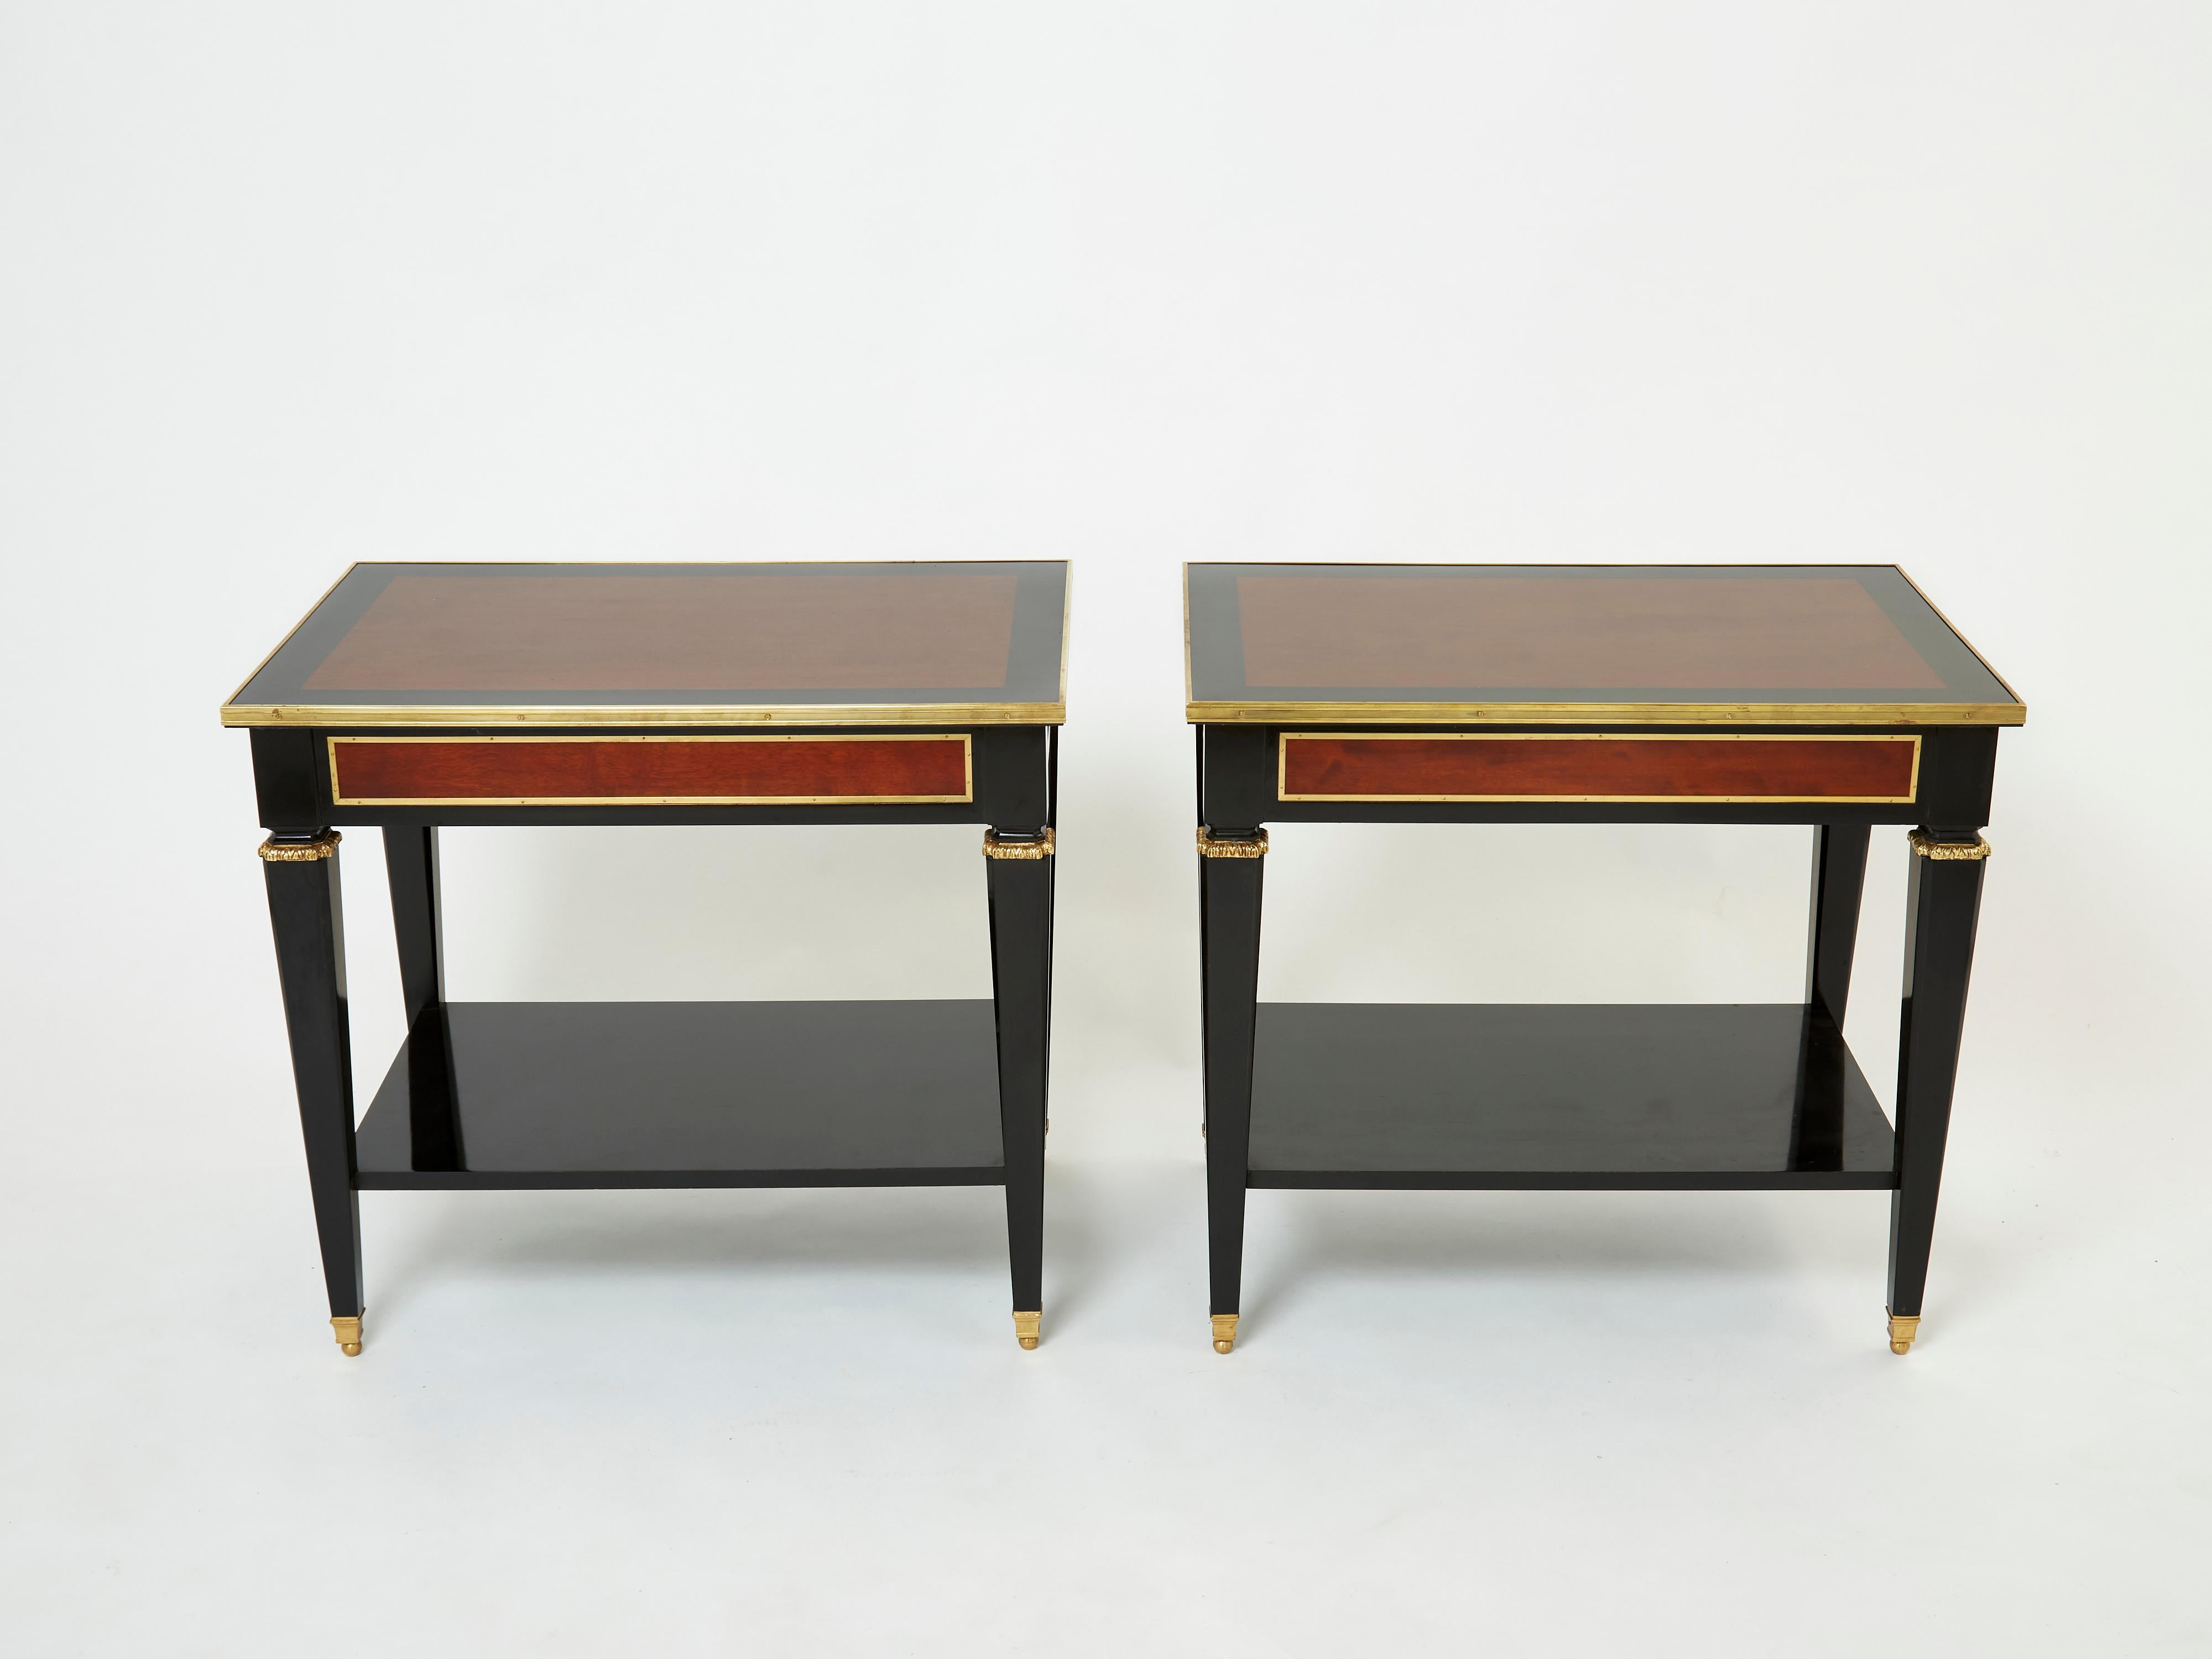 This rare pair of two-tier end tables or side tables by French house Maison Jansen was created in the early 1950s with mahogany and black varnished wood, with brass details and accents. These tables are typical of the timeless French neoclassical